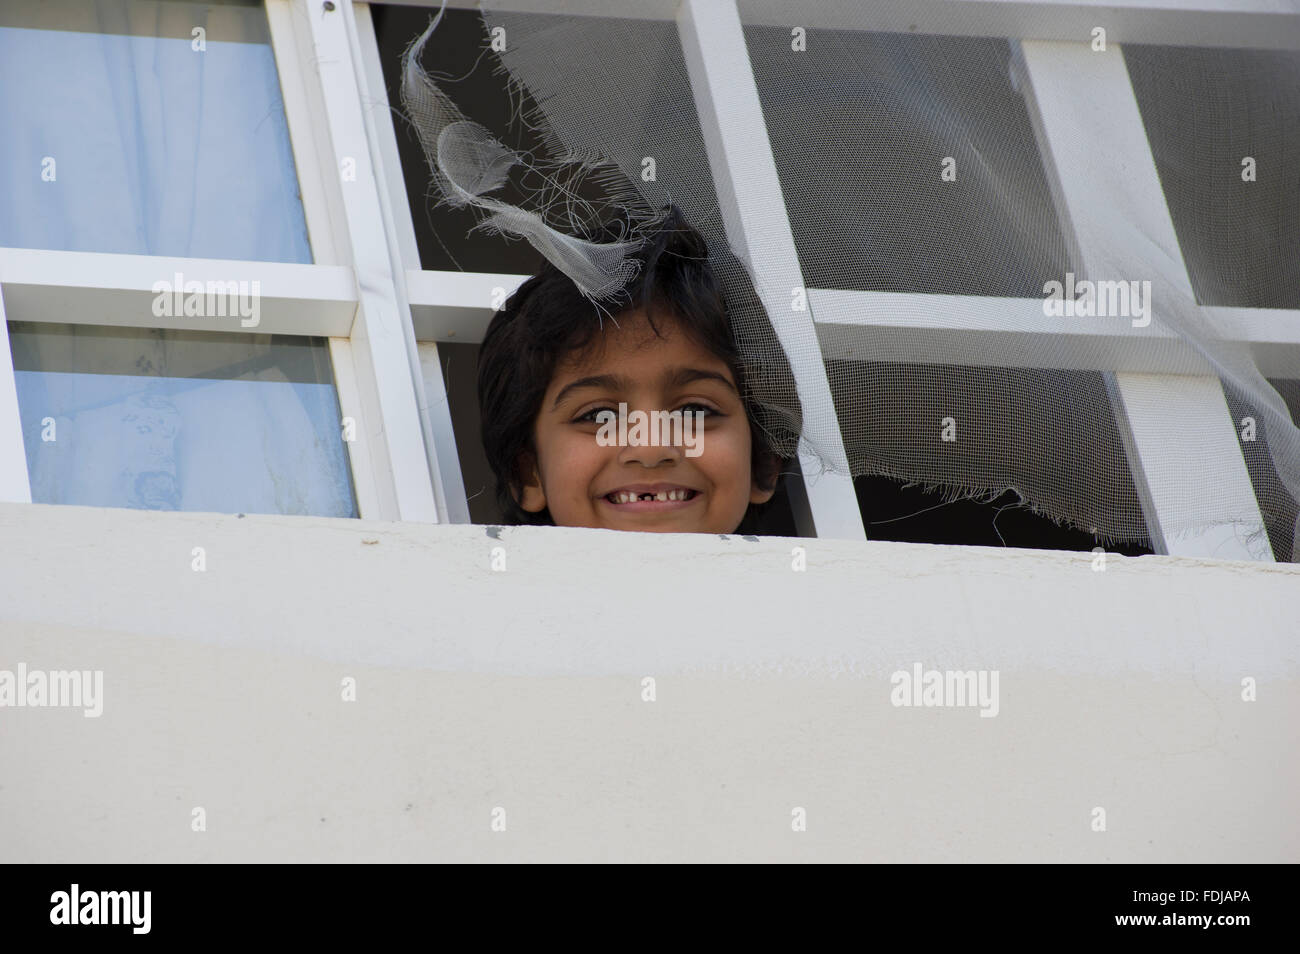 A child in Muscat, Oman smiling with a gap in his teeth and looking out of a broken window through a torn screen Stock Photo